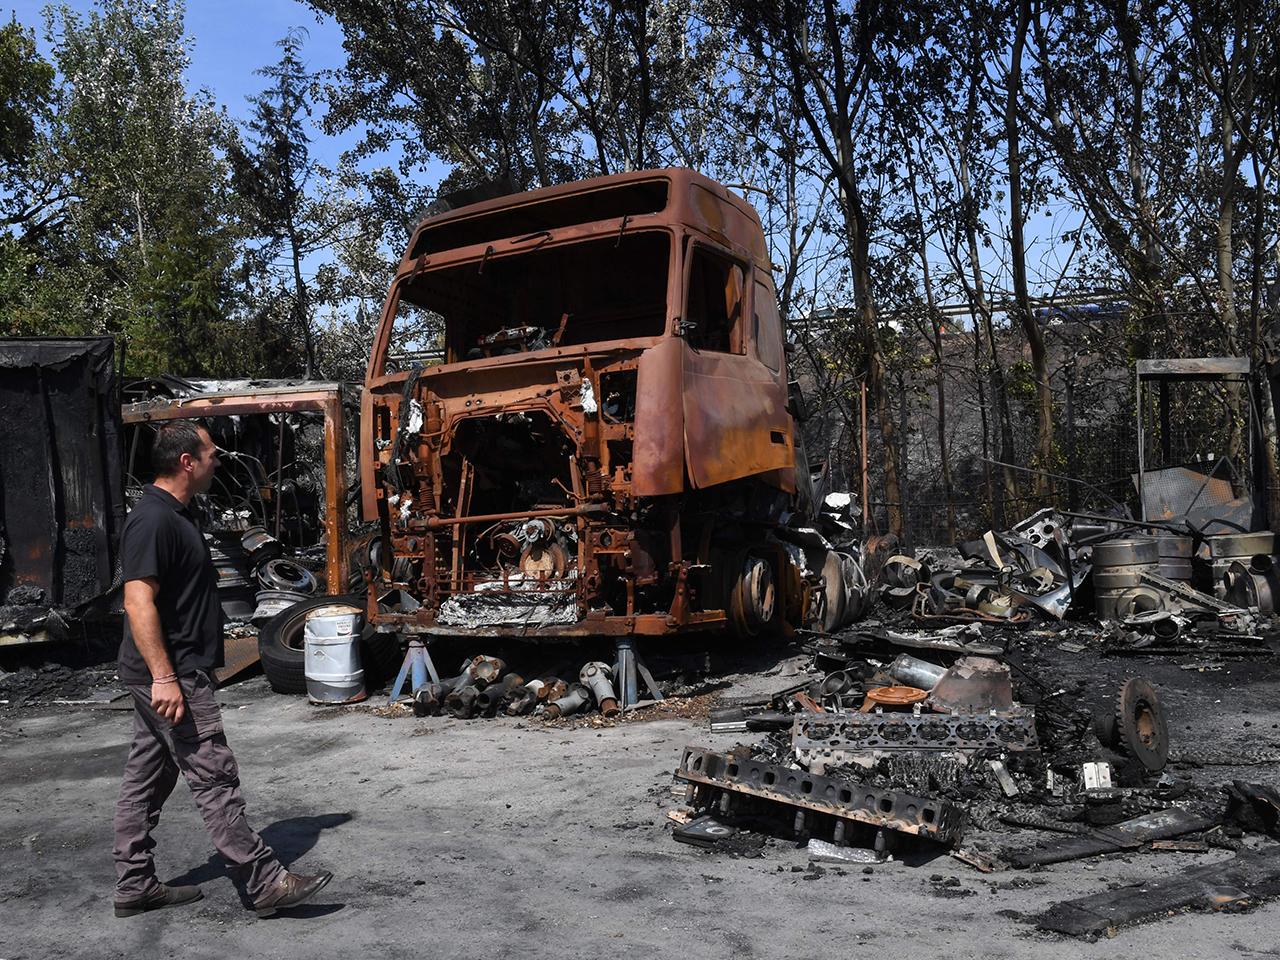 A man walks in front of burnt trucks following a fire which has devastated some 3,300 hectares in the area, in Les Pennes Mirabeau, north of Marseille on August 11, 2016